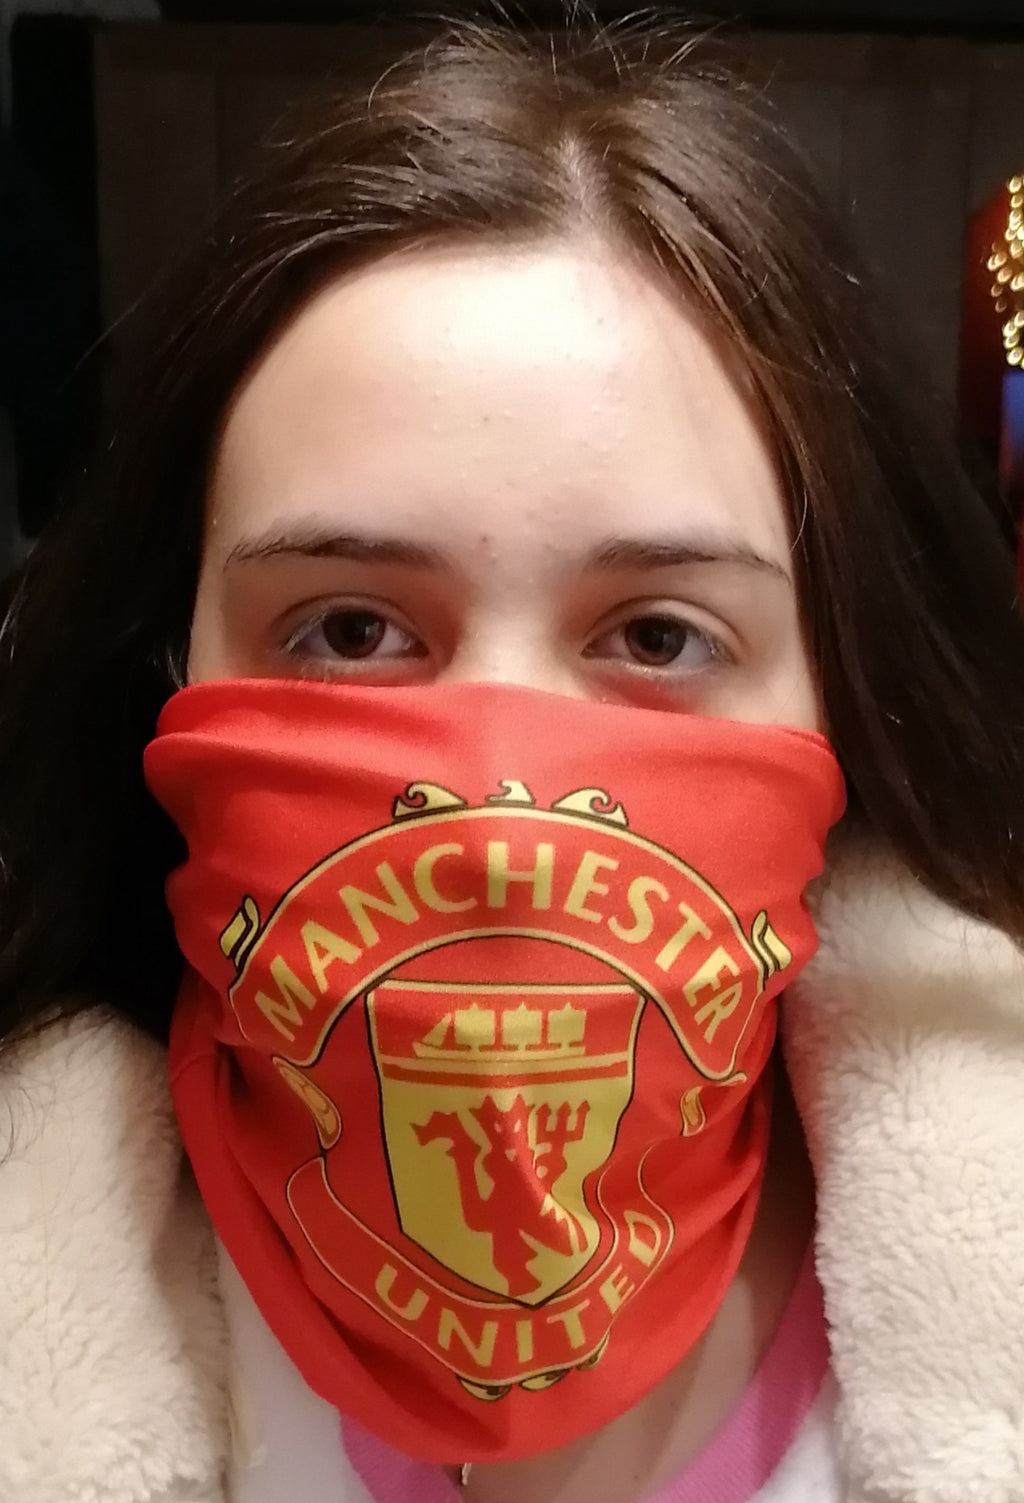 manchester united face cover snood